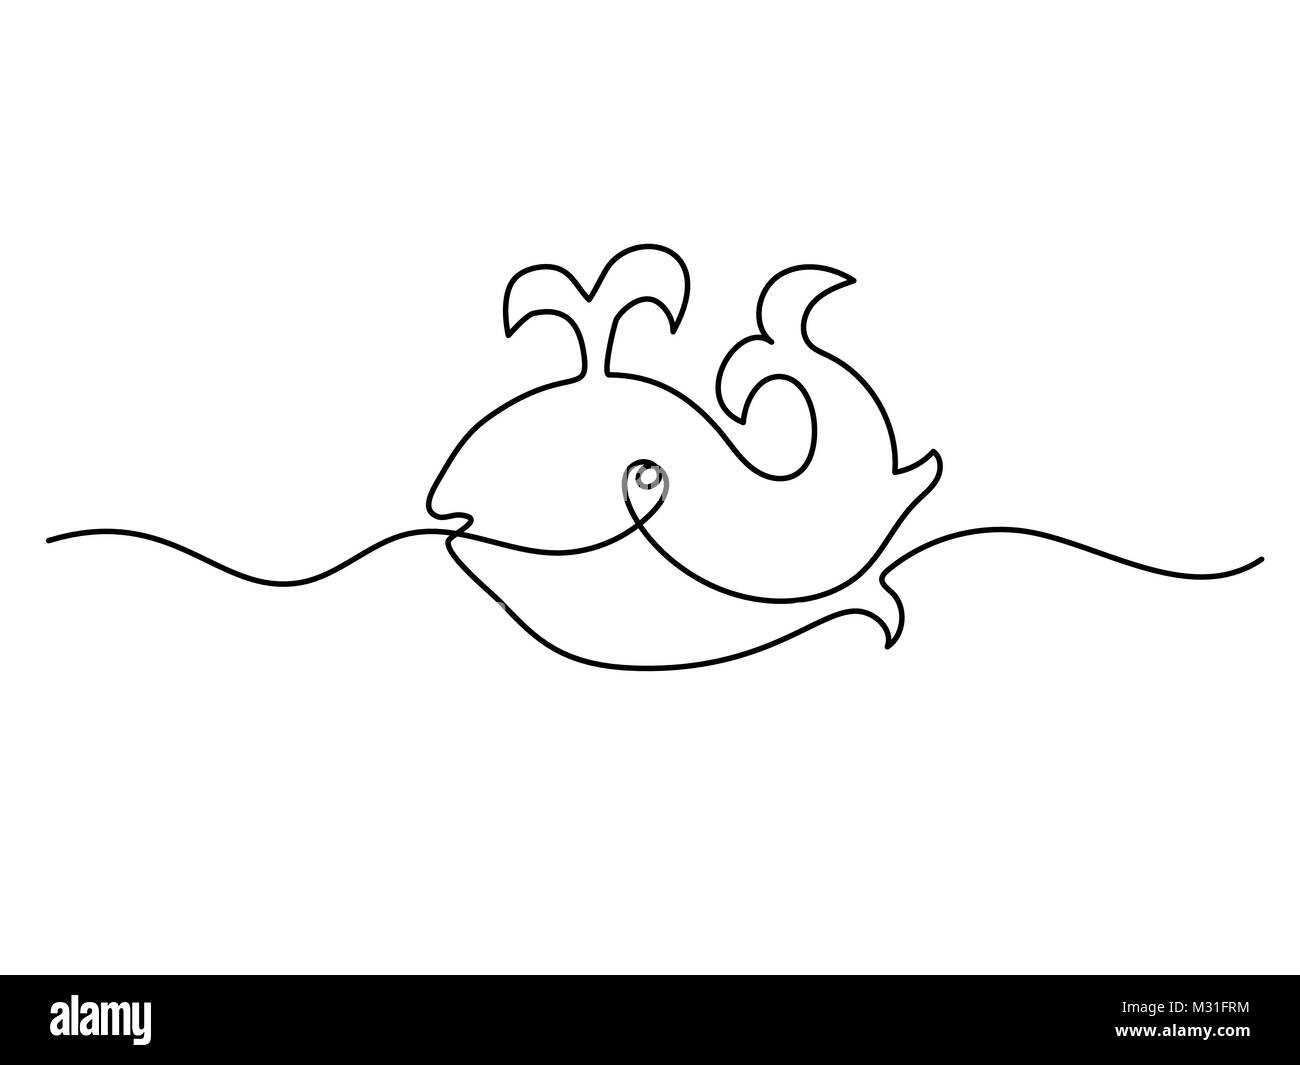 Continuous line drawing. Funny whale logo Stock Vector